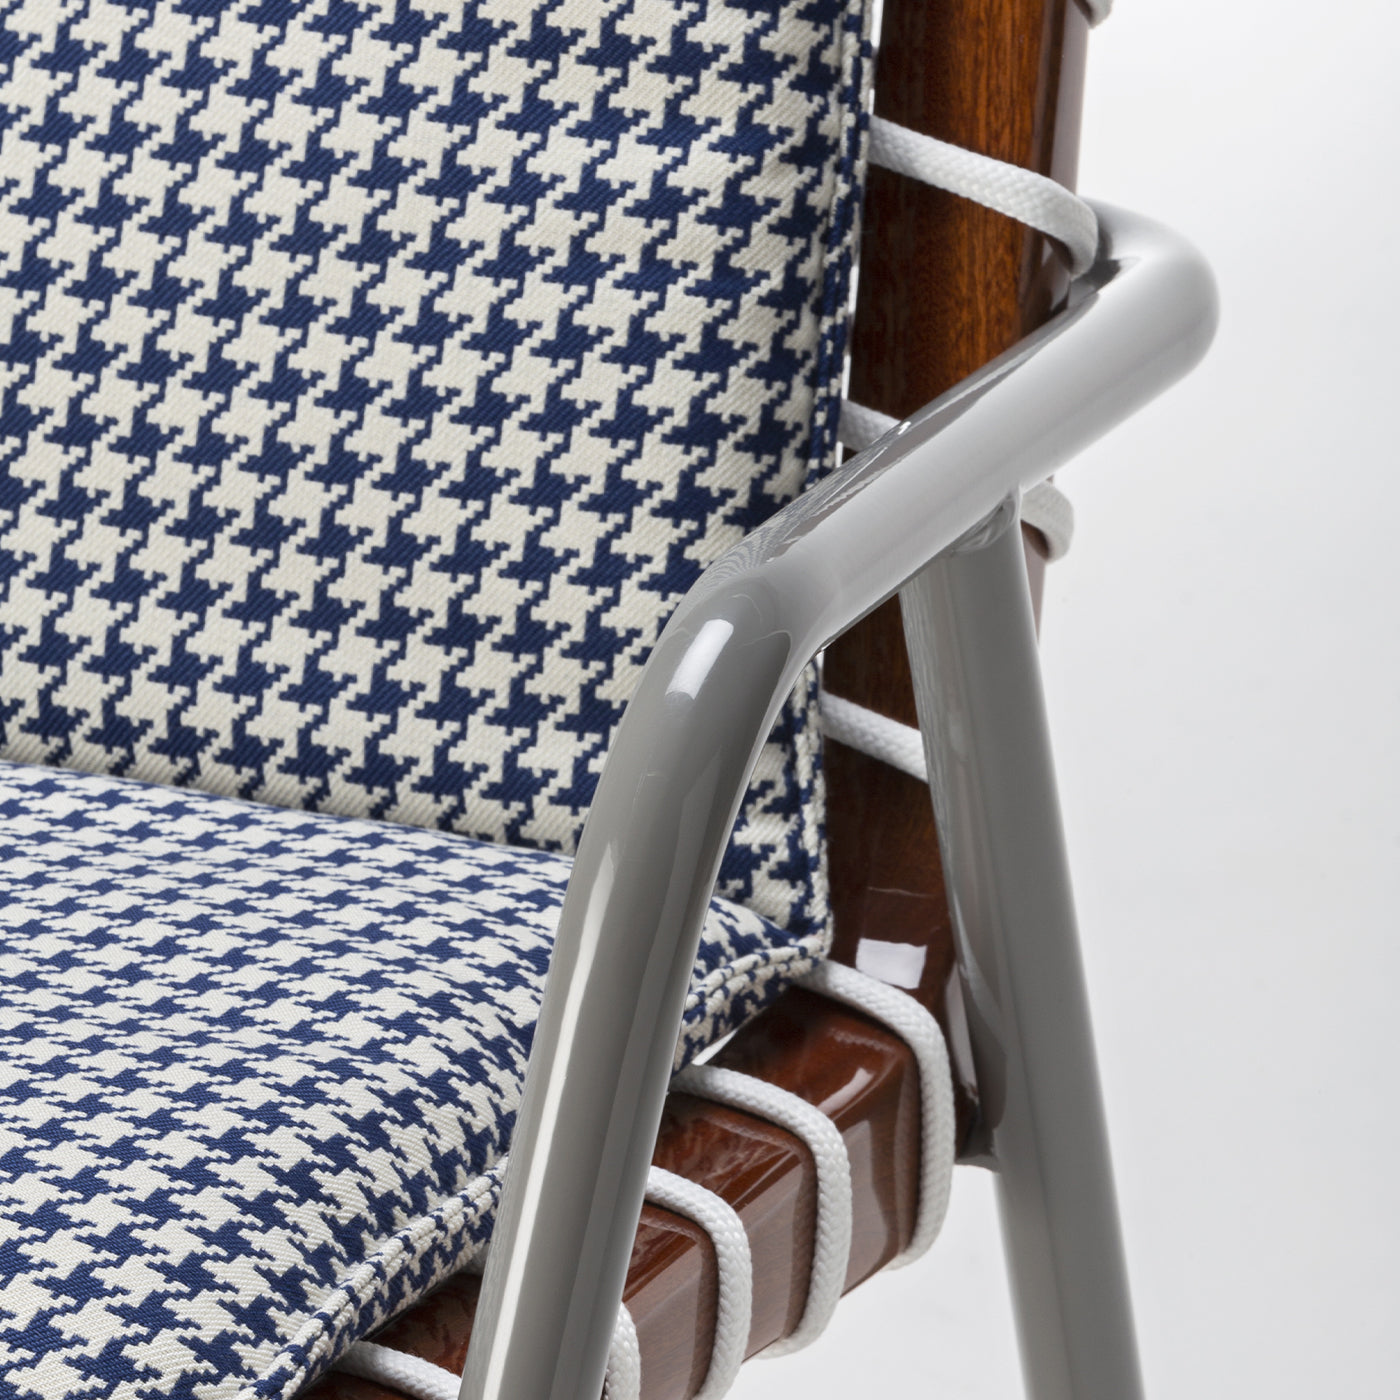 Sunset Dining Chair by Paola Navone - Alternative view 4